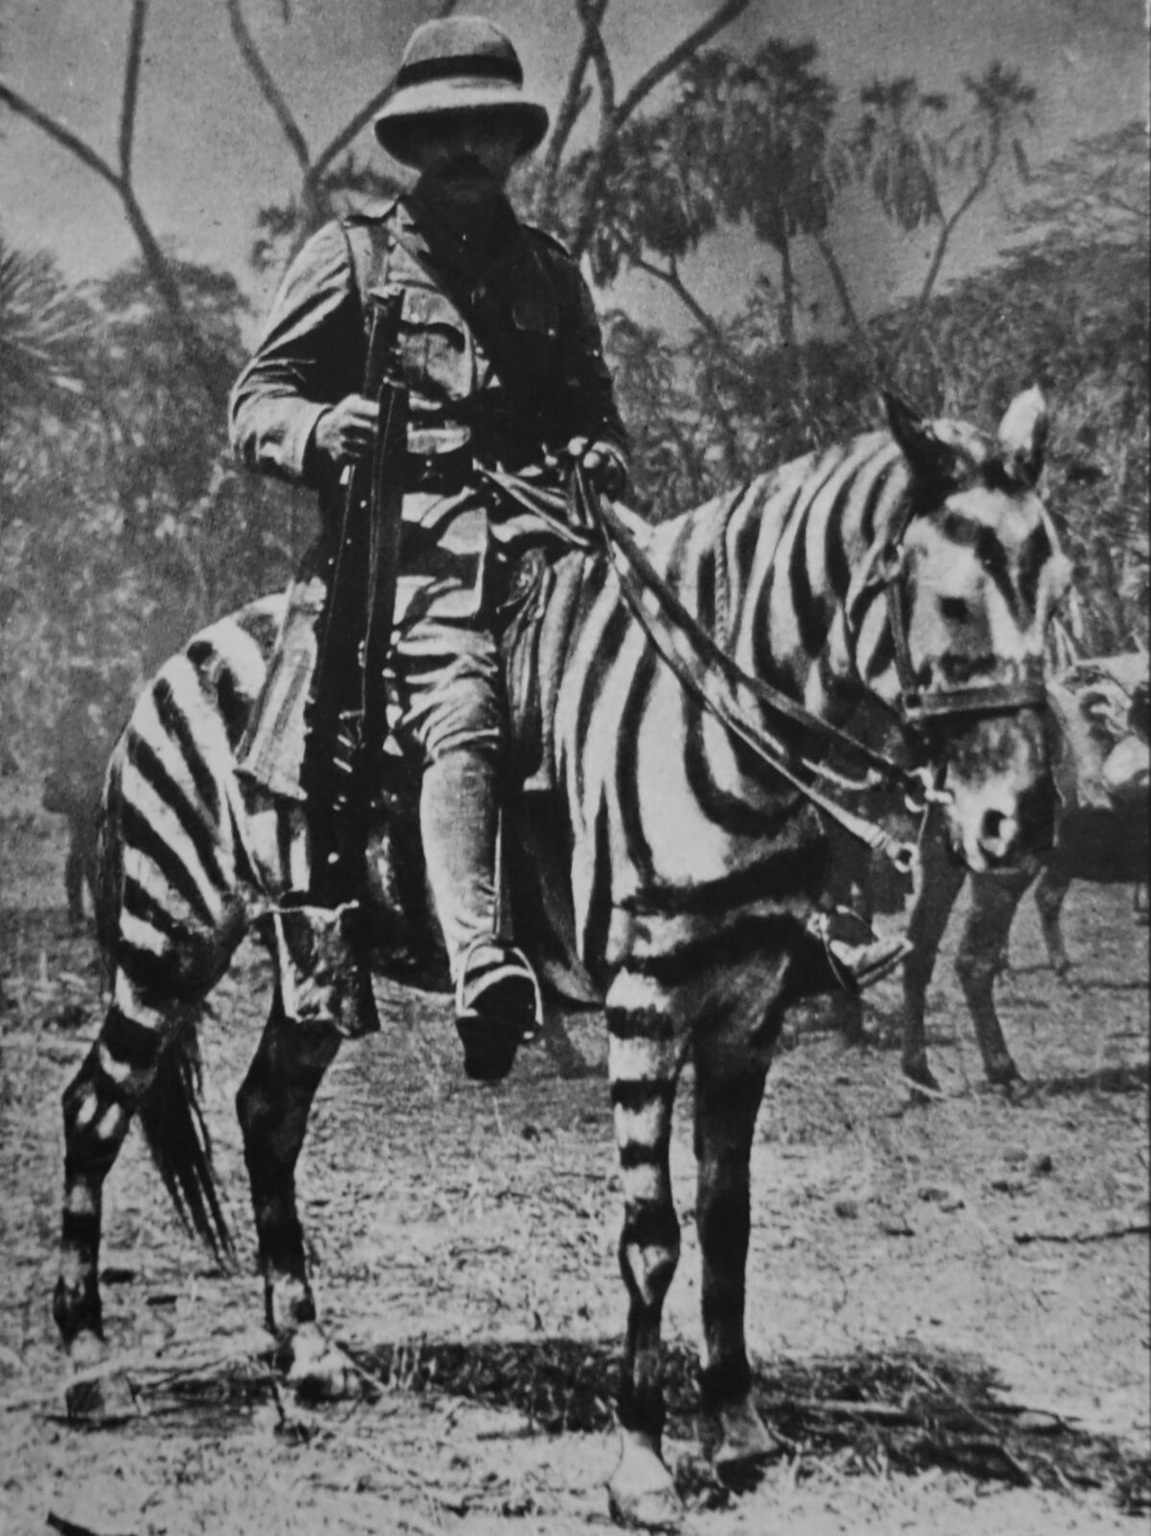 British soldier on a pony in zebra camouflage. East Africa WWI (1915)